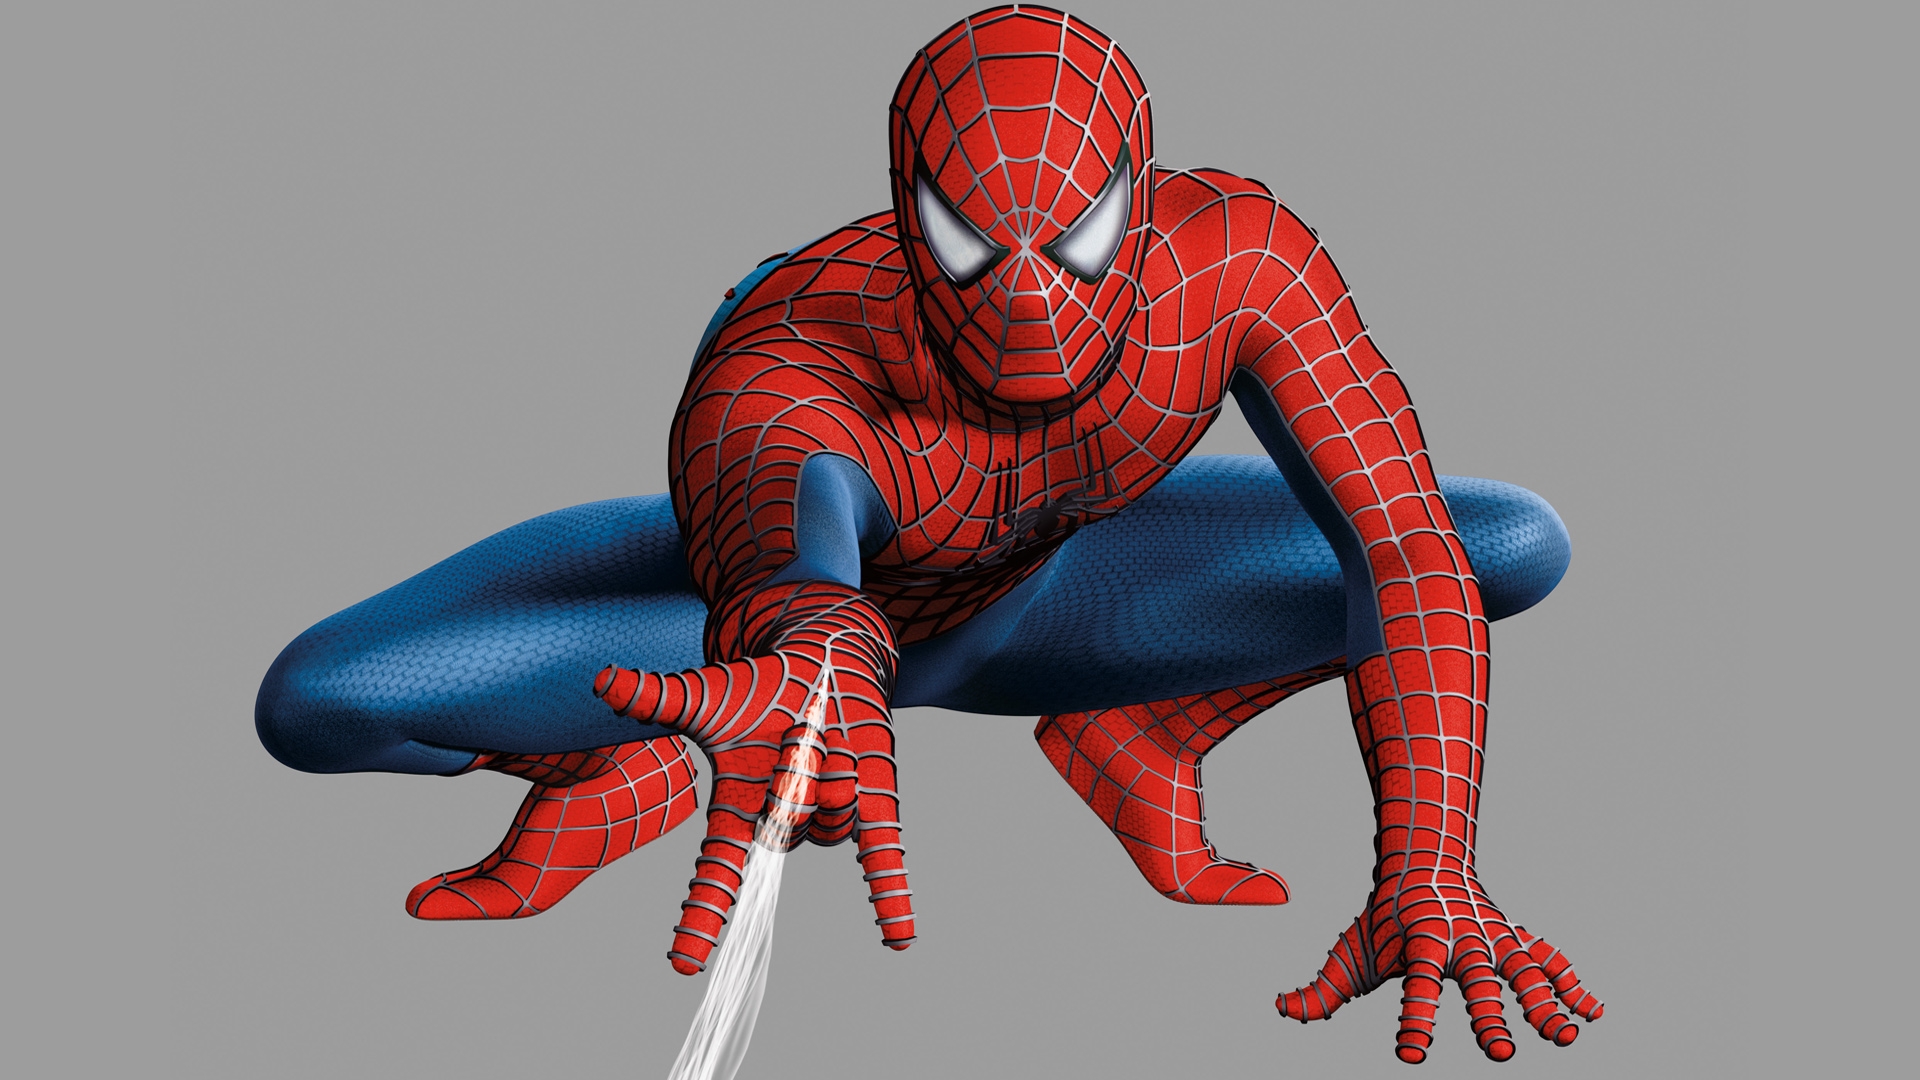 Spiderman 4   High Definition Wallpapers   HD wallpapers 1920x1080